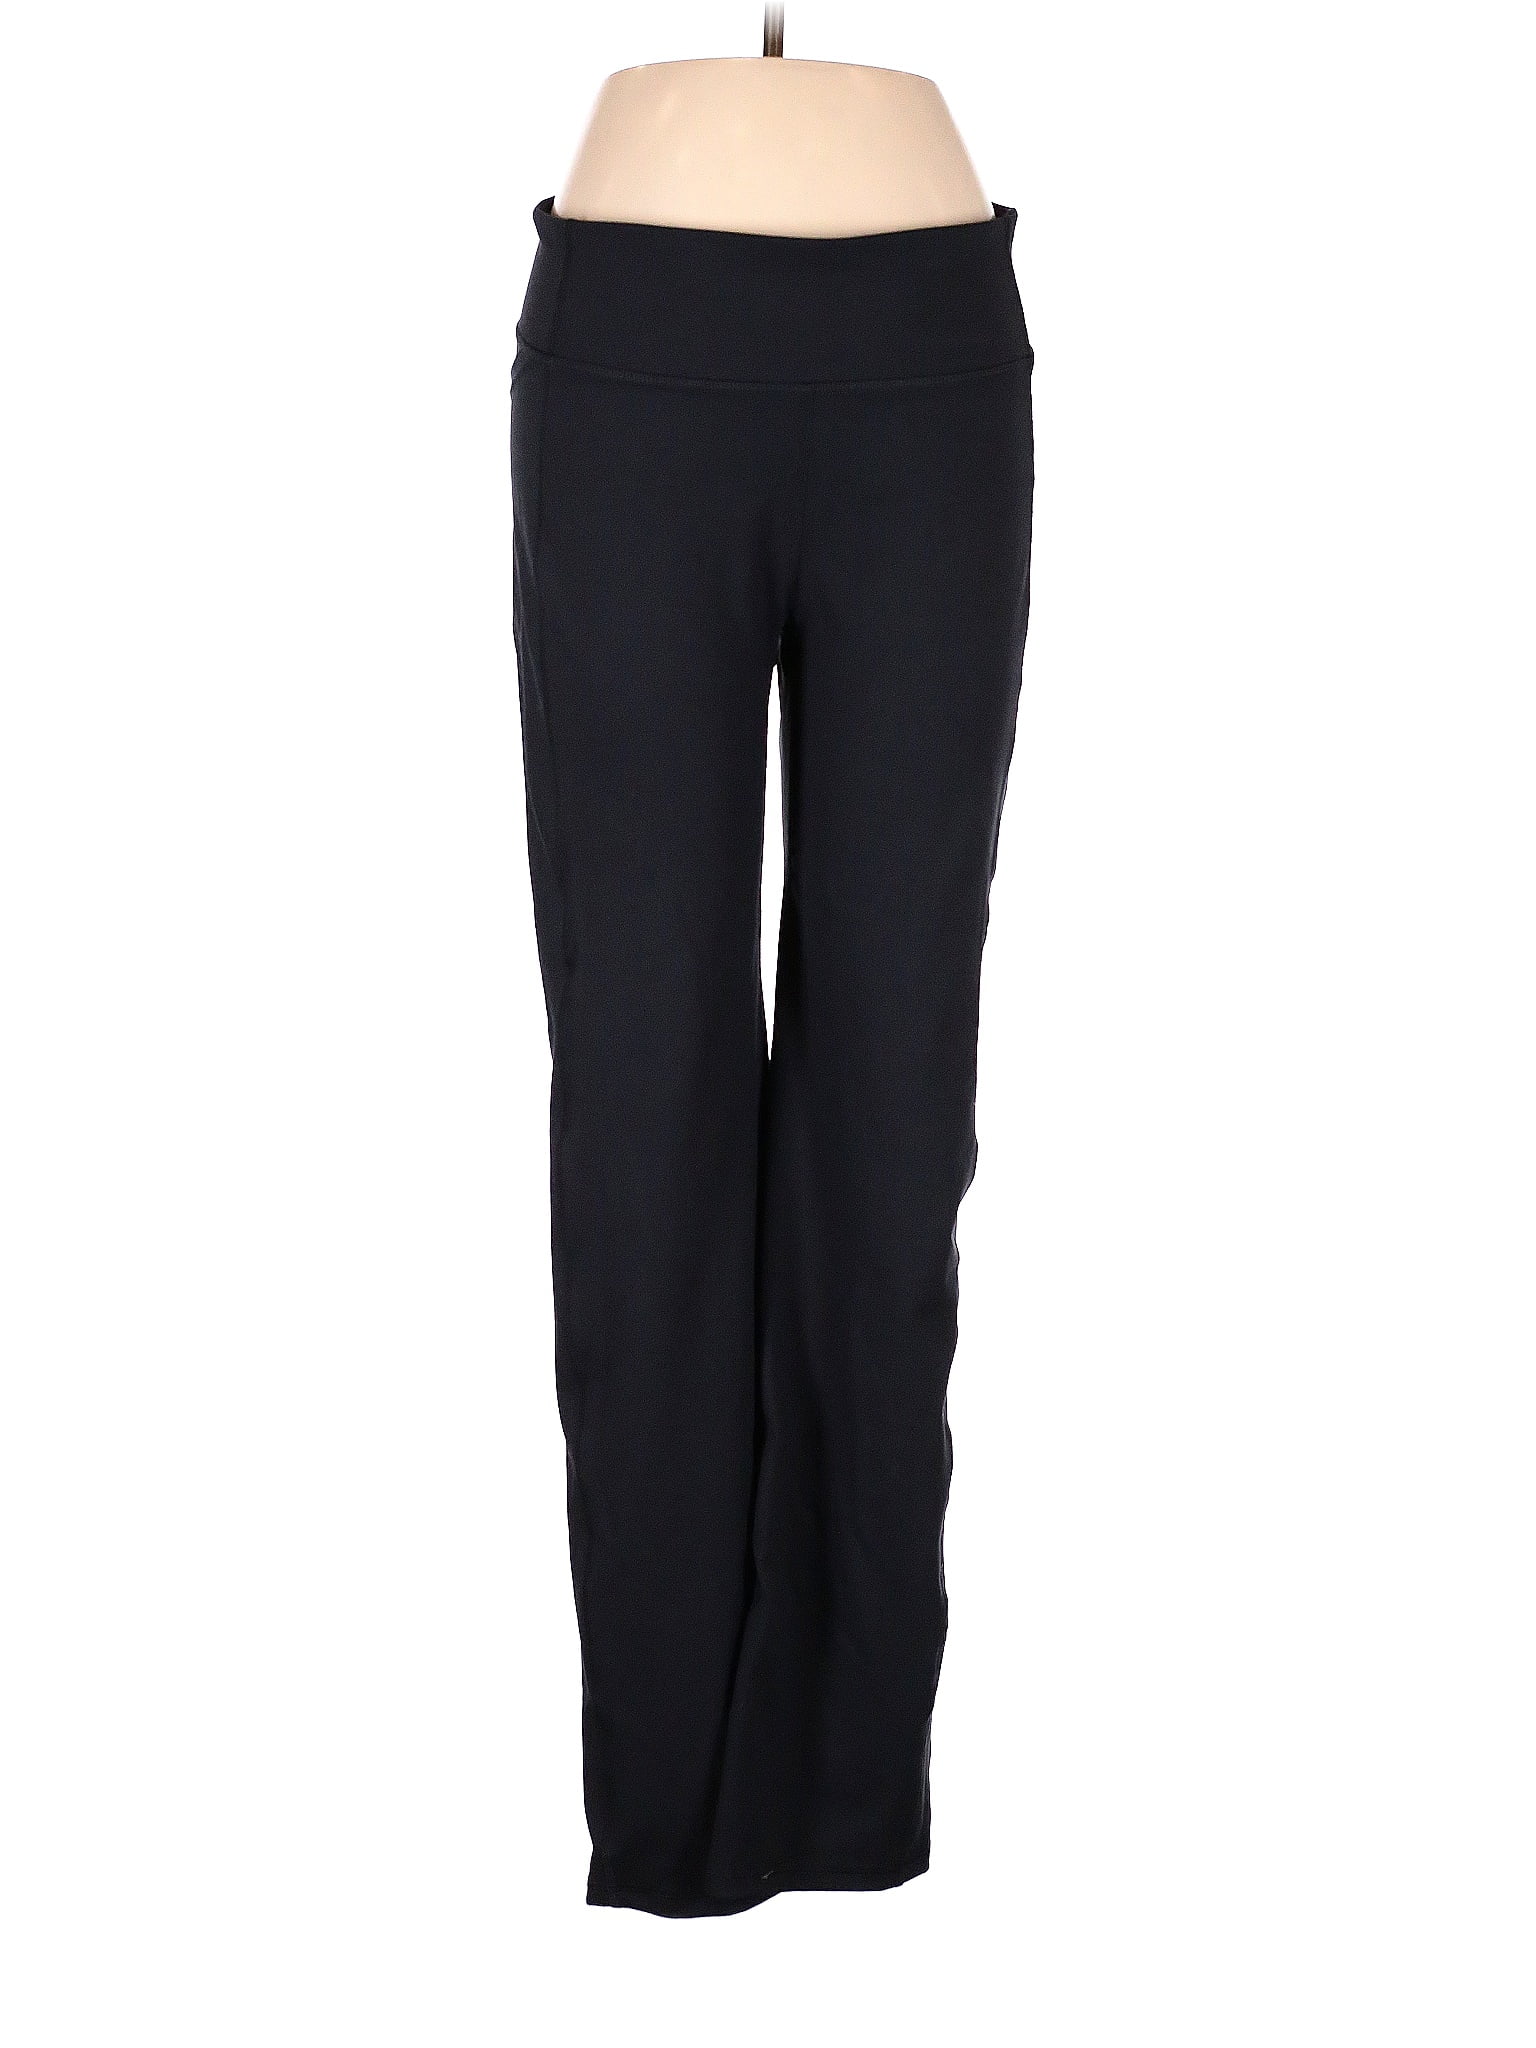 all in motion Black Active Pants Size M - 41% off | thredUP